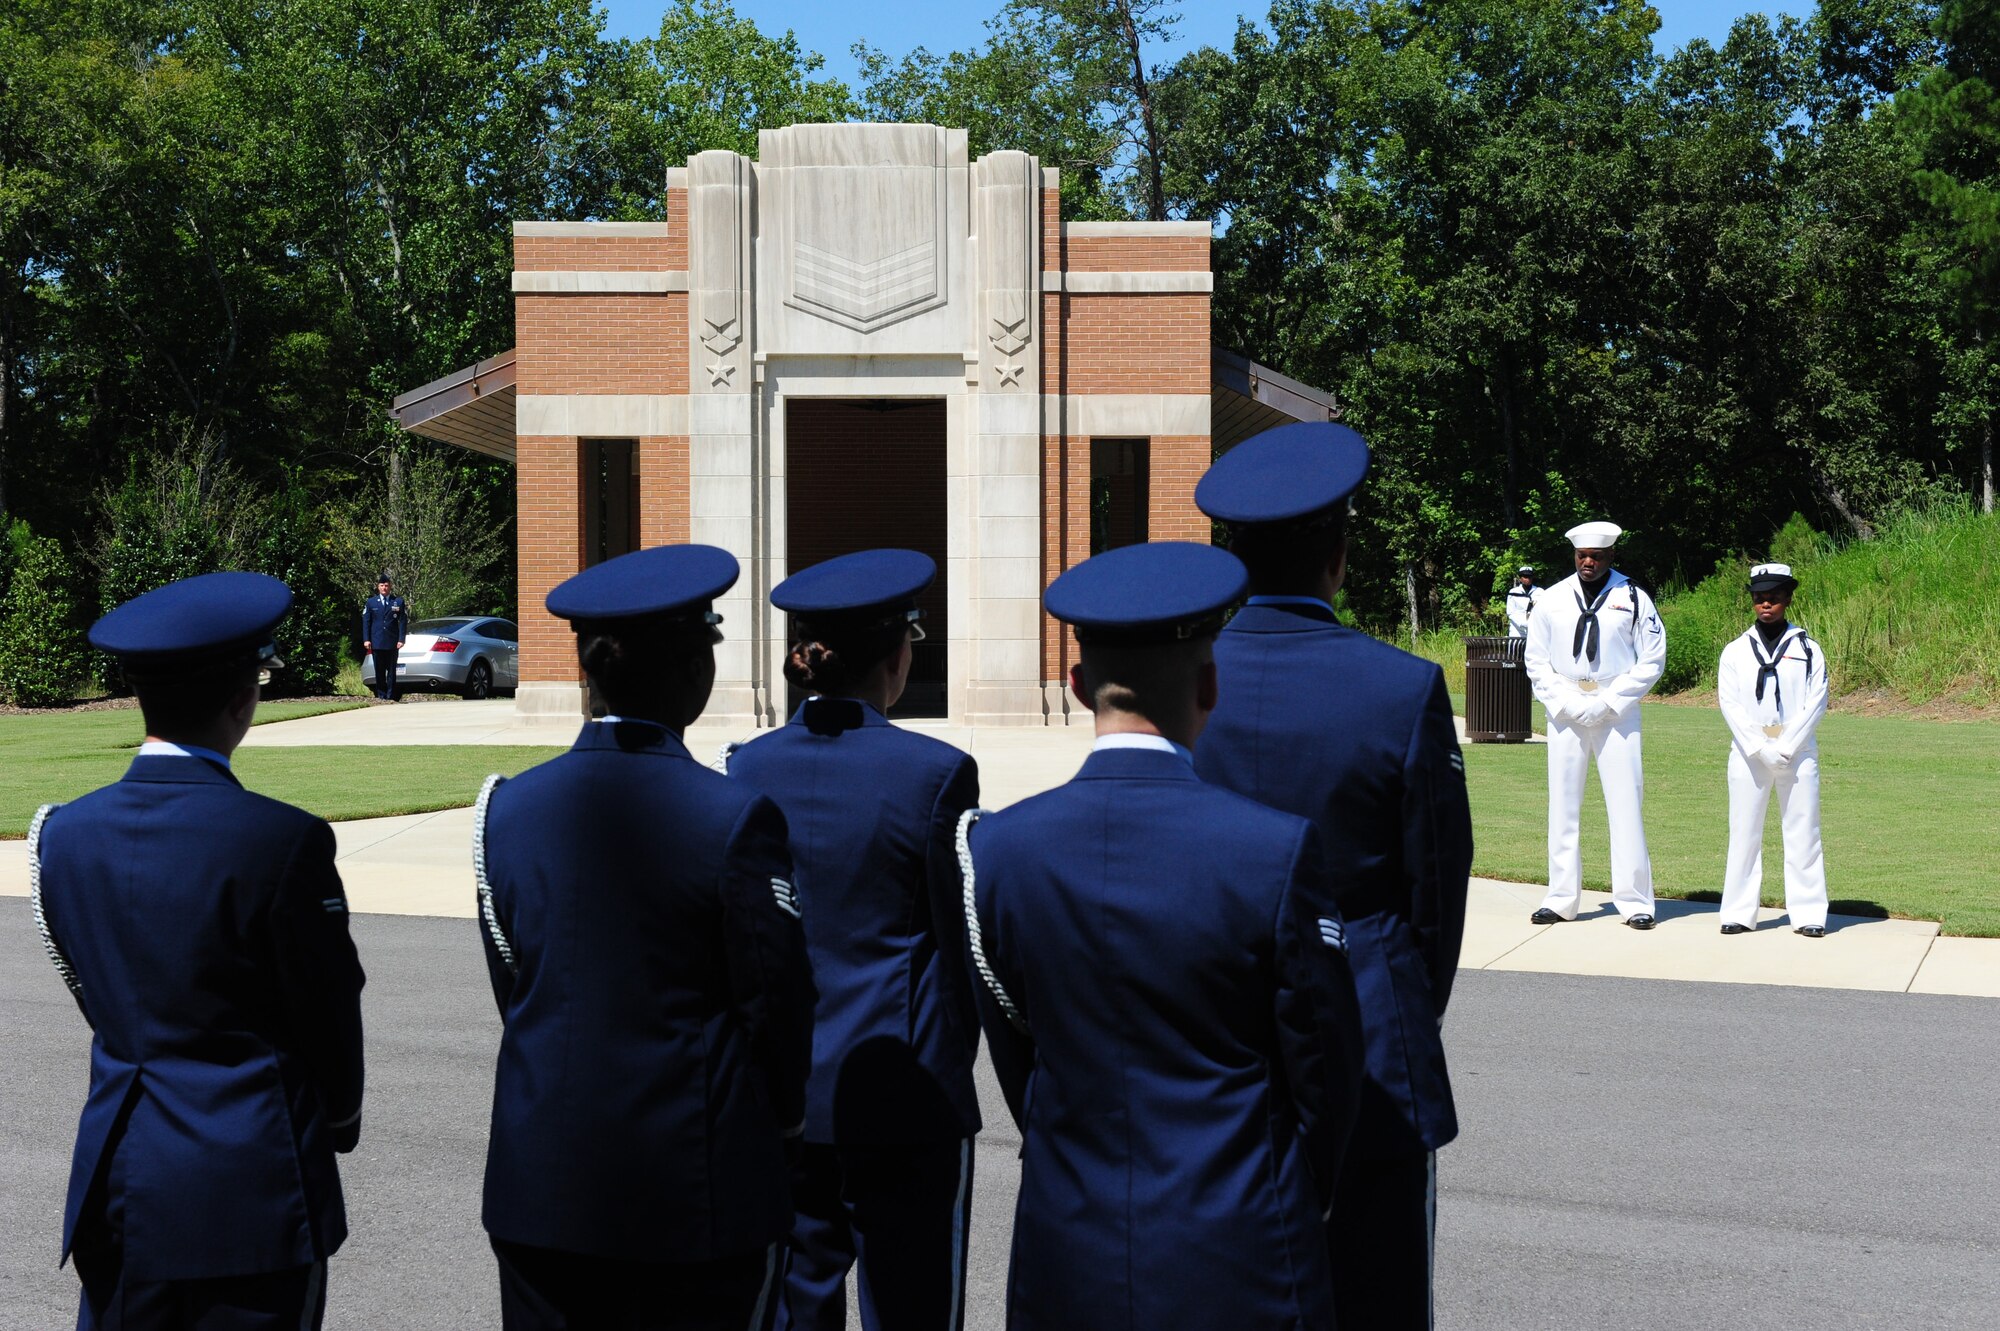 Members of the Maxwell Air Force Base Honor Guard perform a memorial ceremony held Aug. 22, 2012 at the Alabama National Cemetary in Montevallo Ala. Although Mr. was U.S. Naval veteran, Honor Guard Airmen participate in joint service funerals around the globe. (U.S. Air Force photo by Master Sgt. Michael Voss) 